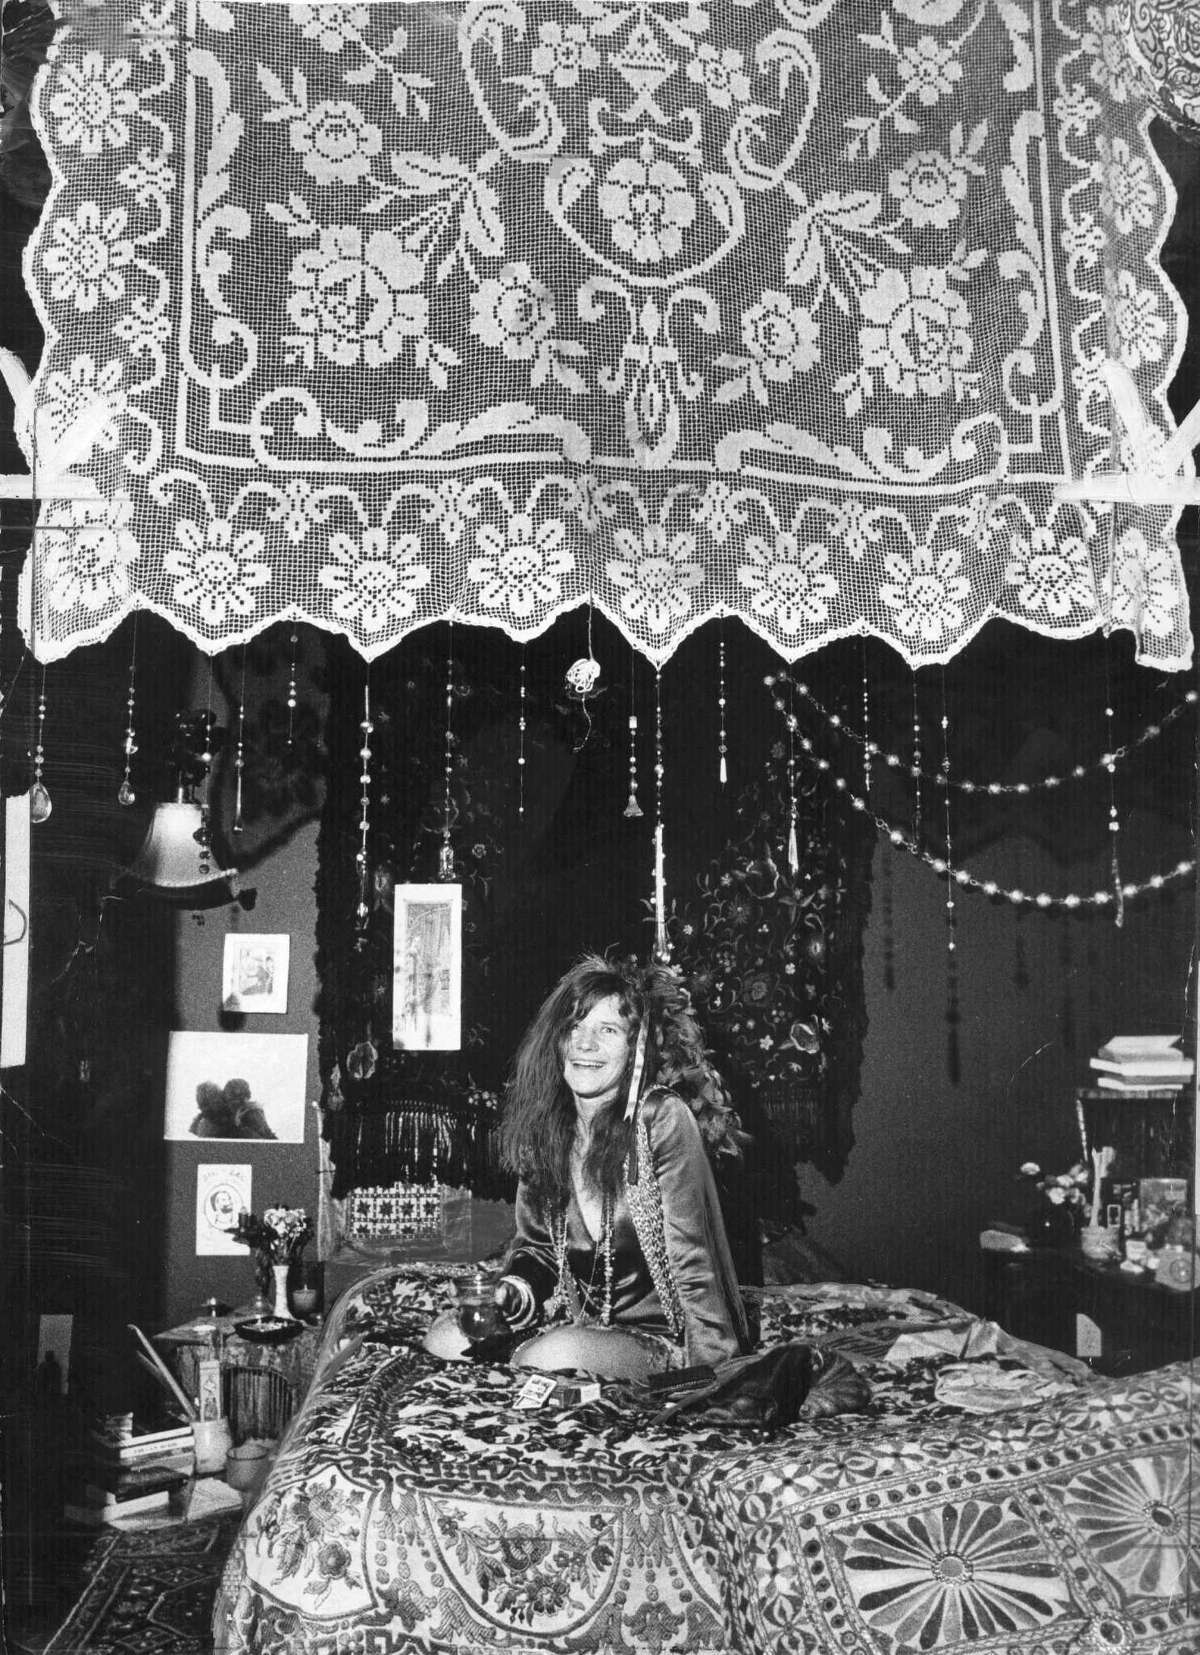 Janis Joplin is acknowledged as one of the creators of the San Francisco Sound.